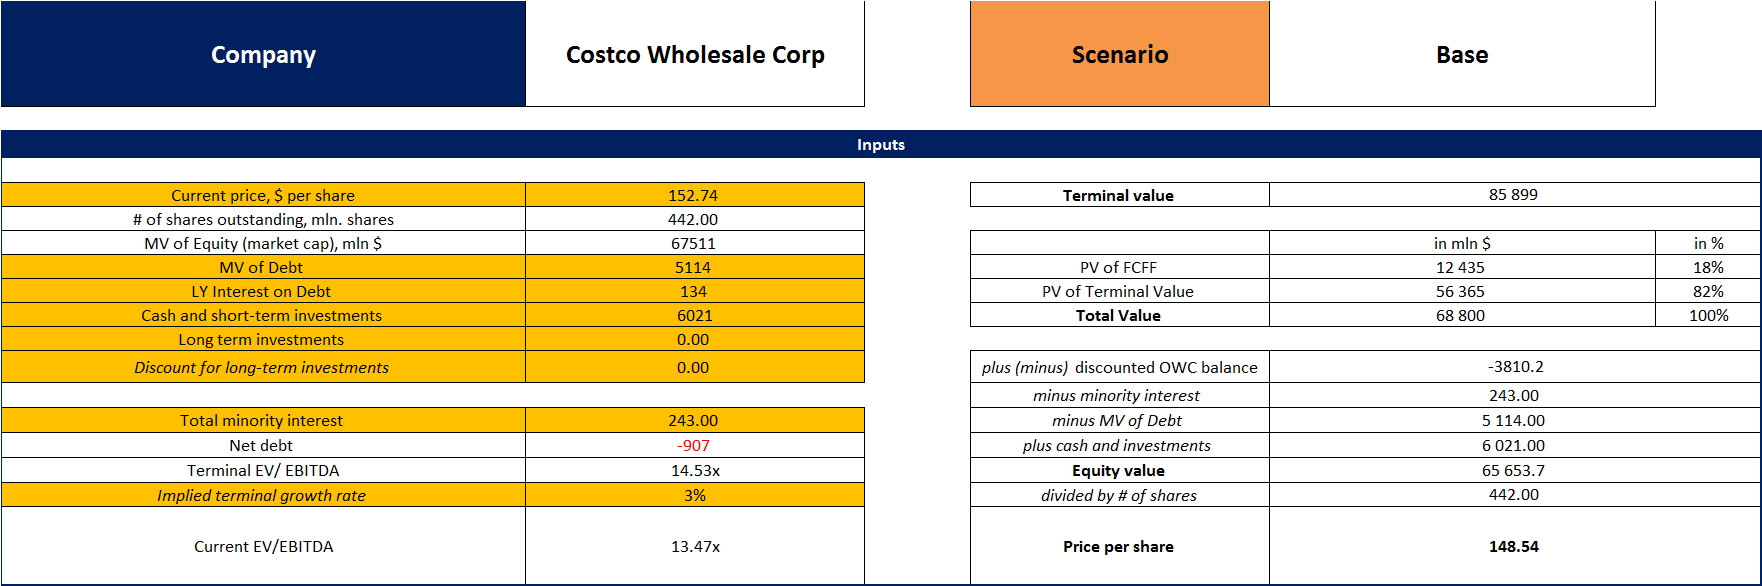 Costco S Revision The Stock Is Valued Fairly Now Nasdaq Cost